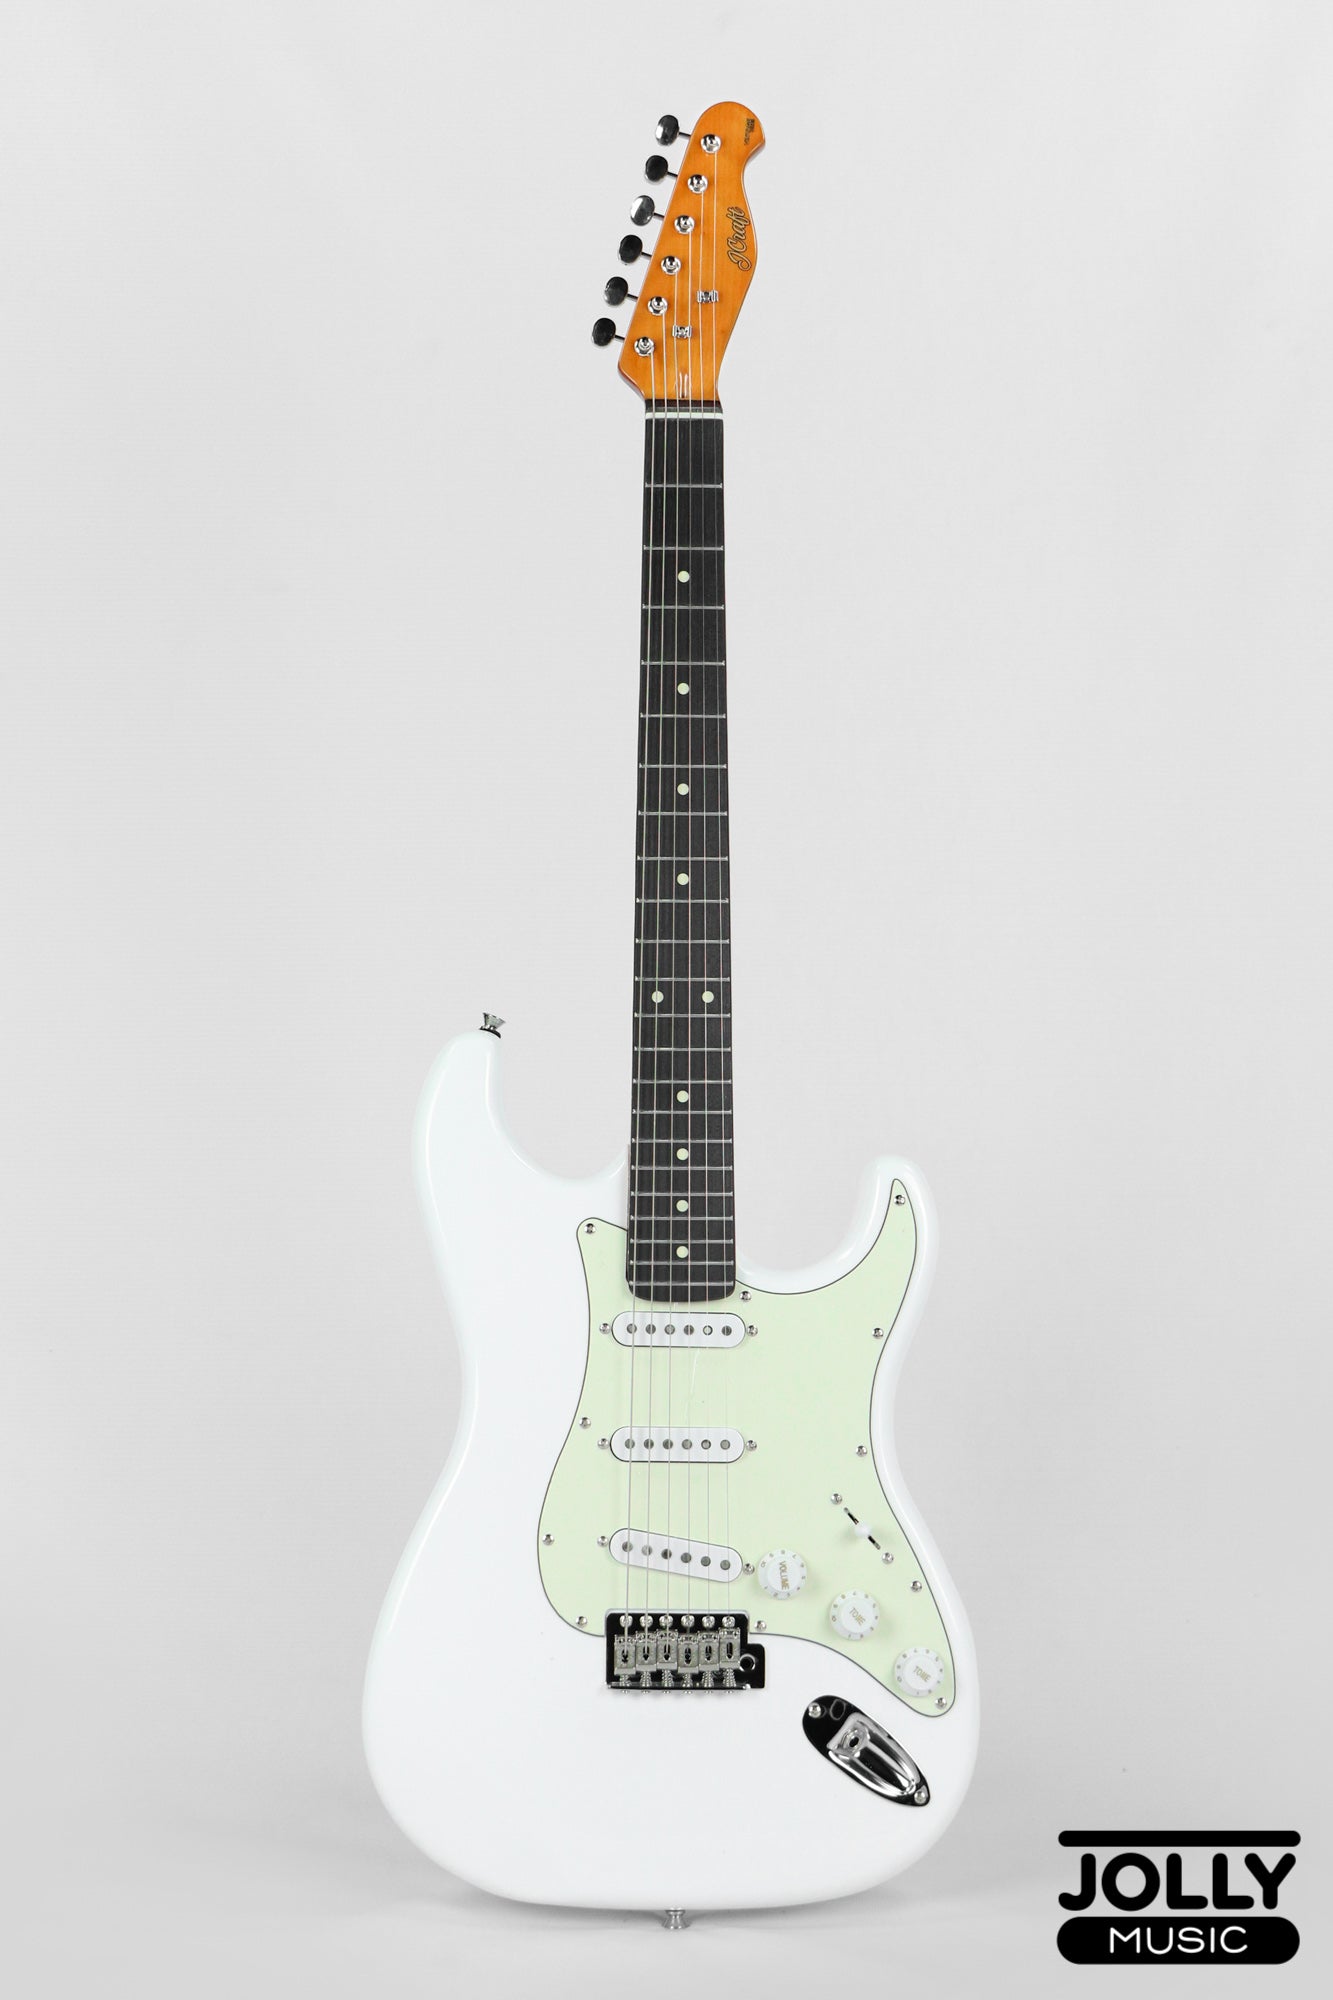 JCraft Vintage Series S-3V S-Style Electric Guitar - Olympic White